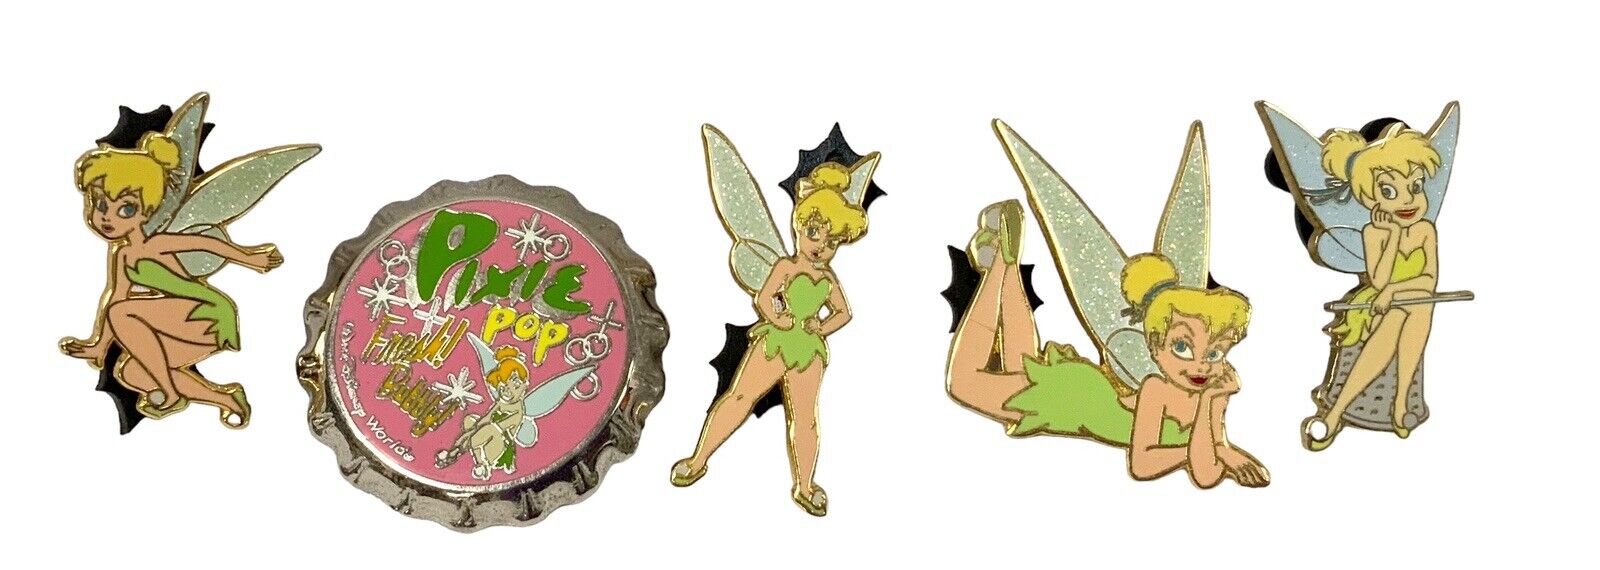 Disney Parks Trading Pins Lot Of 5 Pins Featuring TinkerBell Collectible Fun #A